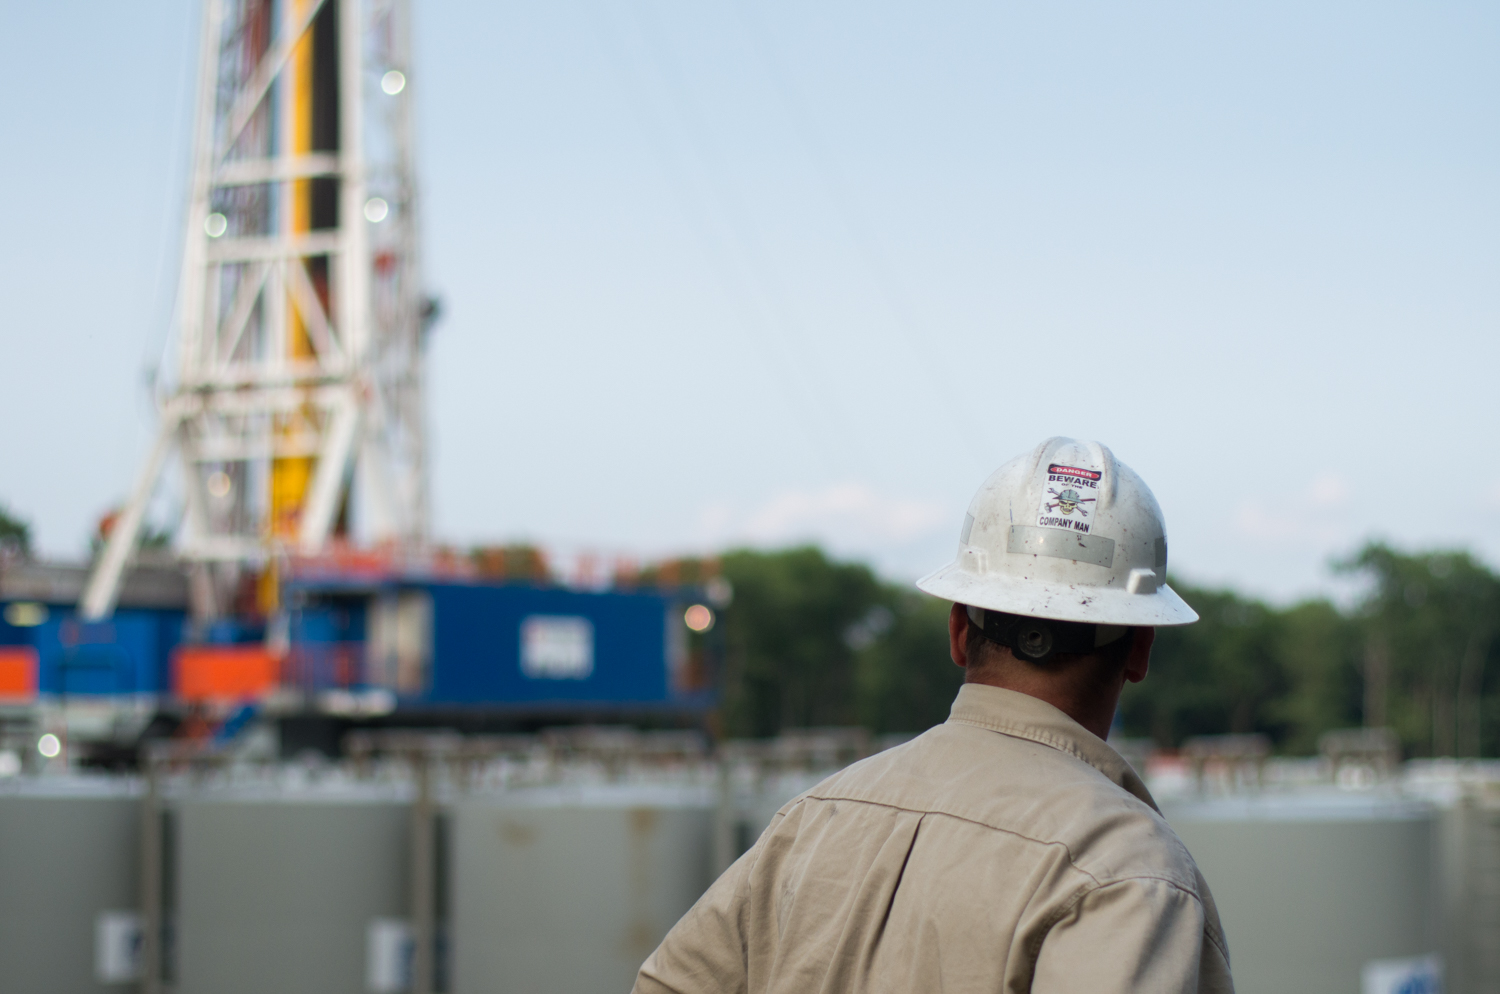 Pennsylvania's natural gas industry has been struggling in the face of low commodity prices. Photo: Joe Ulrich / WITF